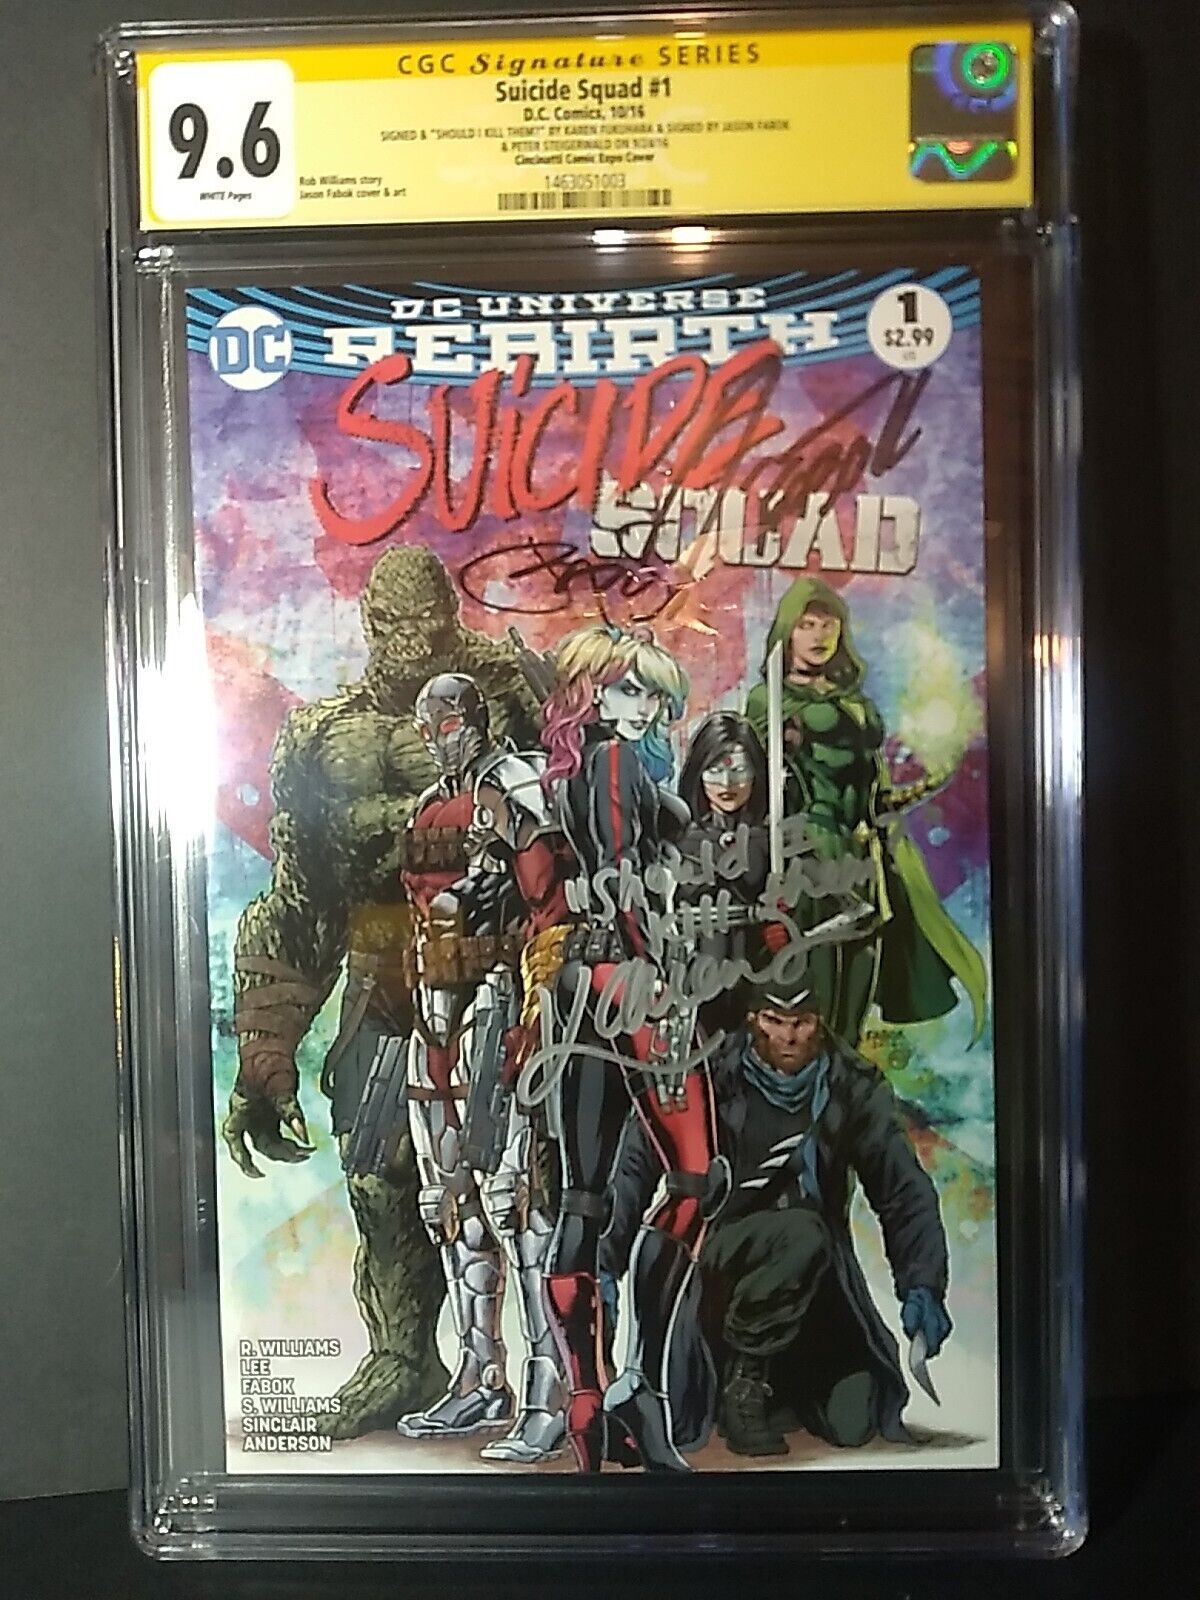  Suicide Squad ss cgc 1 - Katana Actor+ More Fast Shipping 